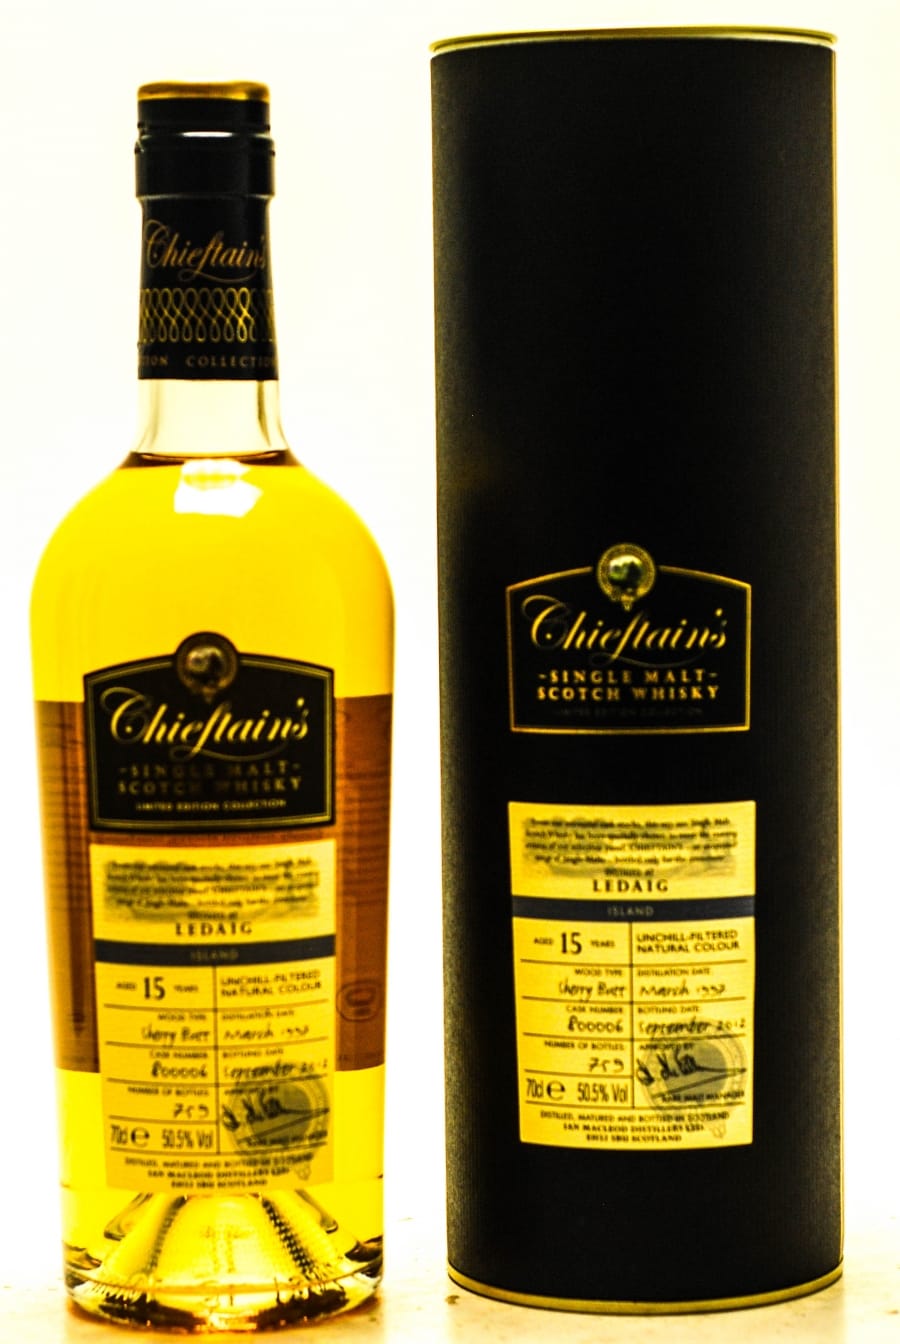 Ledaig - 15 Years Old  Cadenhead authentic collection  Distilled: 1997 Bottled: 10.2012  1 of 246 bottles 56% 1997